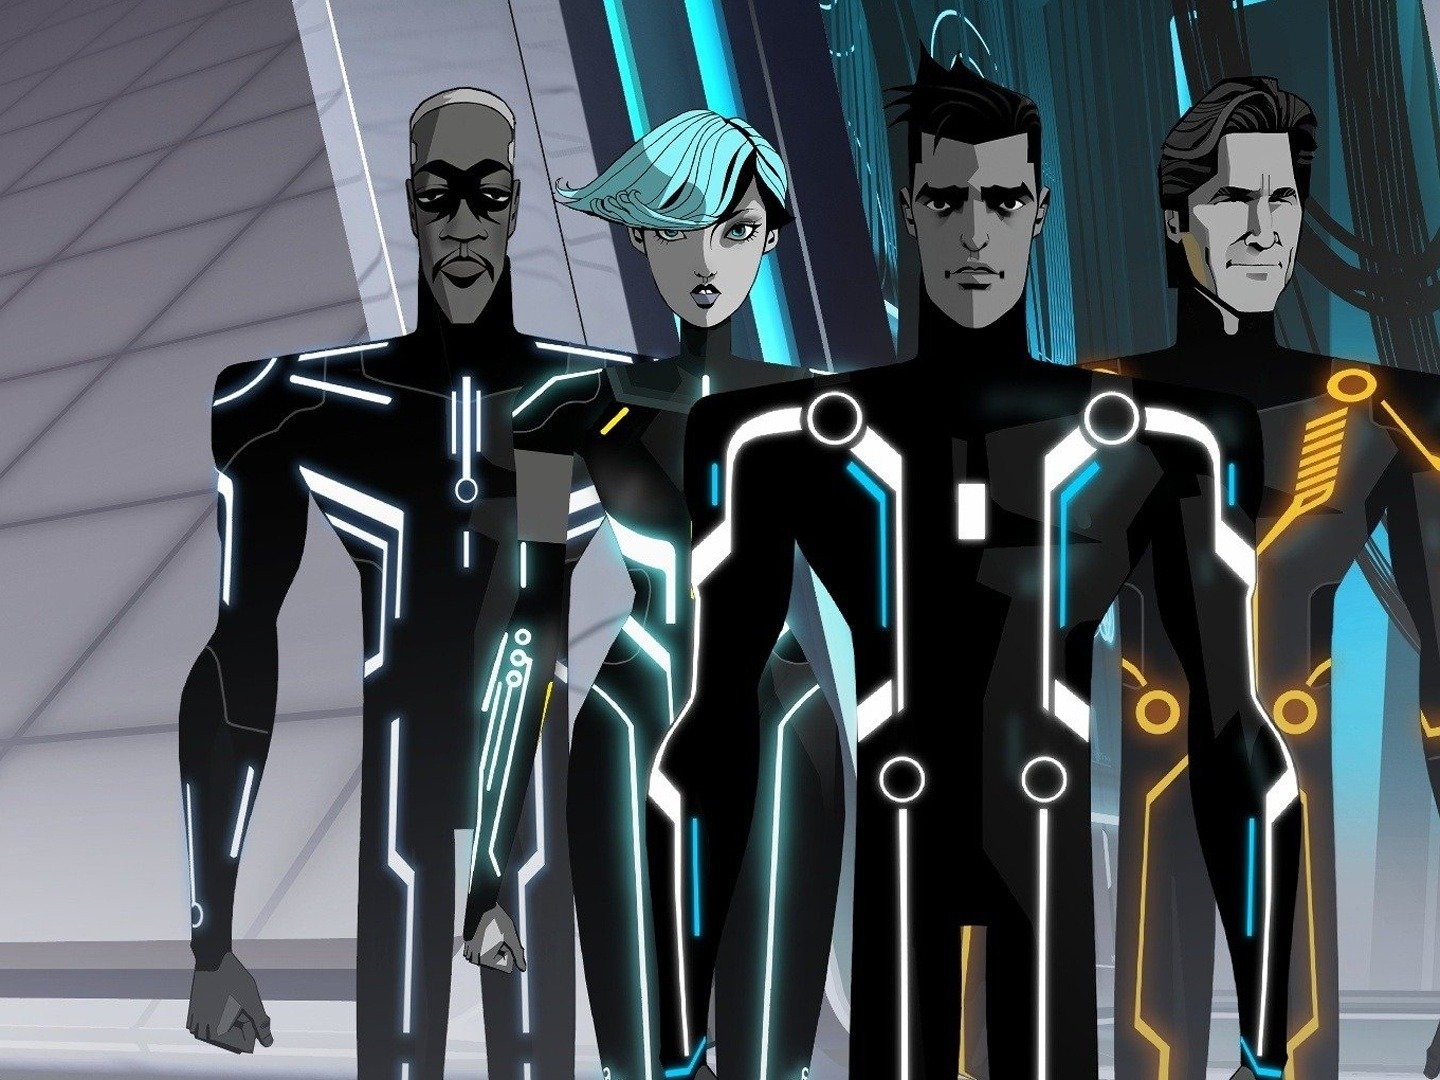 Buy Tron Uprising the Junior Novel: The Renegade Book Online at Low Prices  in India | Tron Uprising the Junior Novel: The Renegade Reviews & Ratings -  Amazon.in